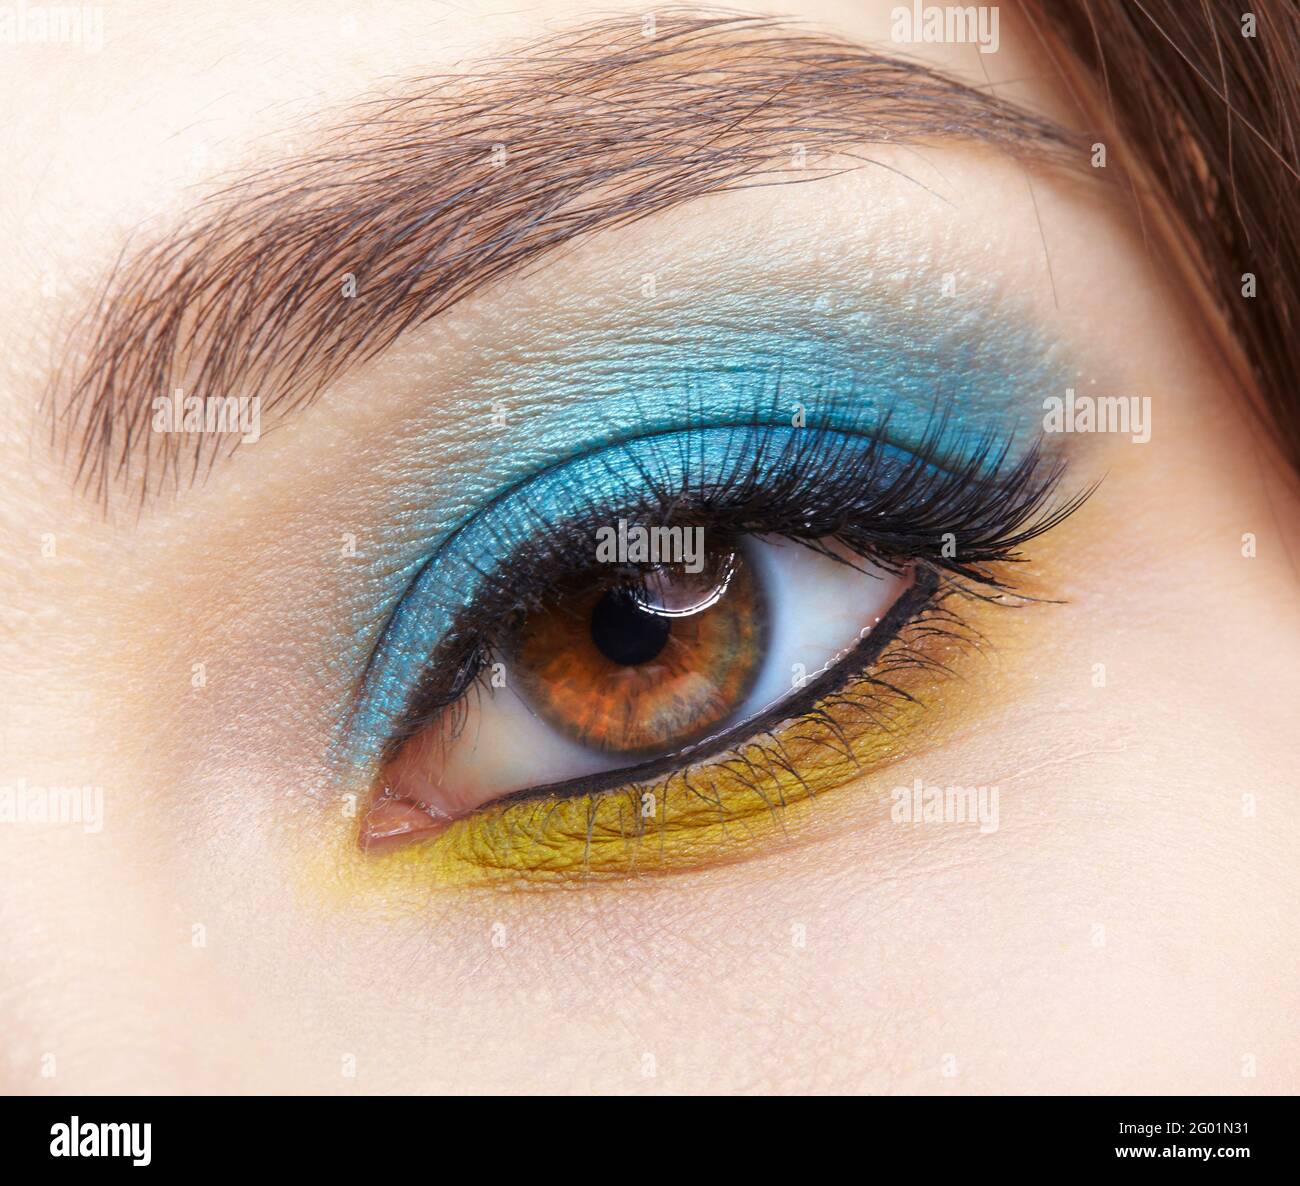 Closeup macro shot of human female eye. Woman with natural evening vogue eyes beauty makeup. Eye with blue smoky eyes shadows and yellow liner. Stock Photo